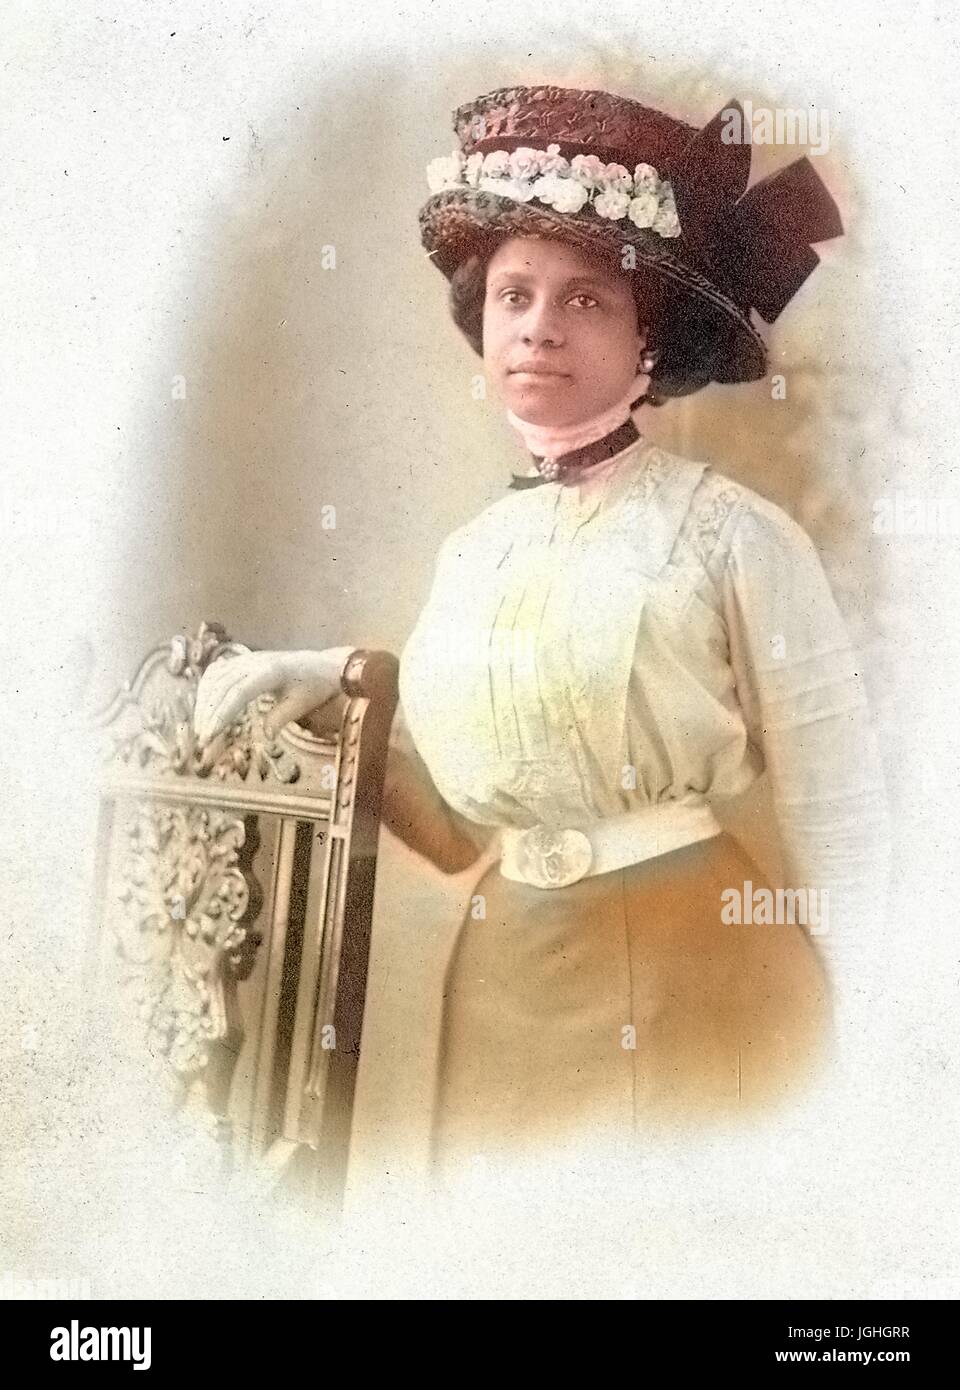 Half length standing portrait of young African American woman next to chair, wearing a blouse, a skirt, an elaborate hat, earrings, and a neutral expression, possibly Philadelphia, Pennsylvania, 1915. Note: Image has been digitally colorized using a modern process. Colors may not be period-accurate. Stock Photo